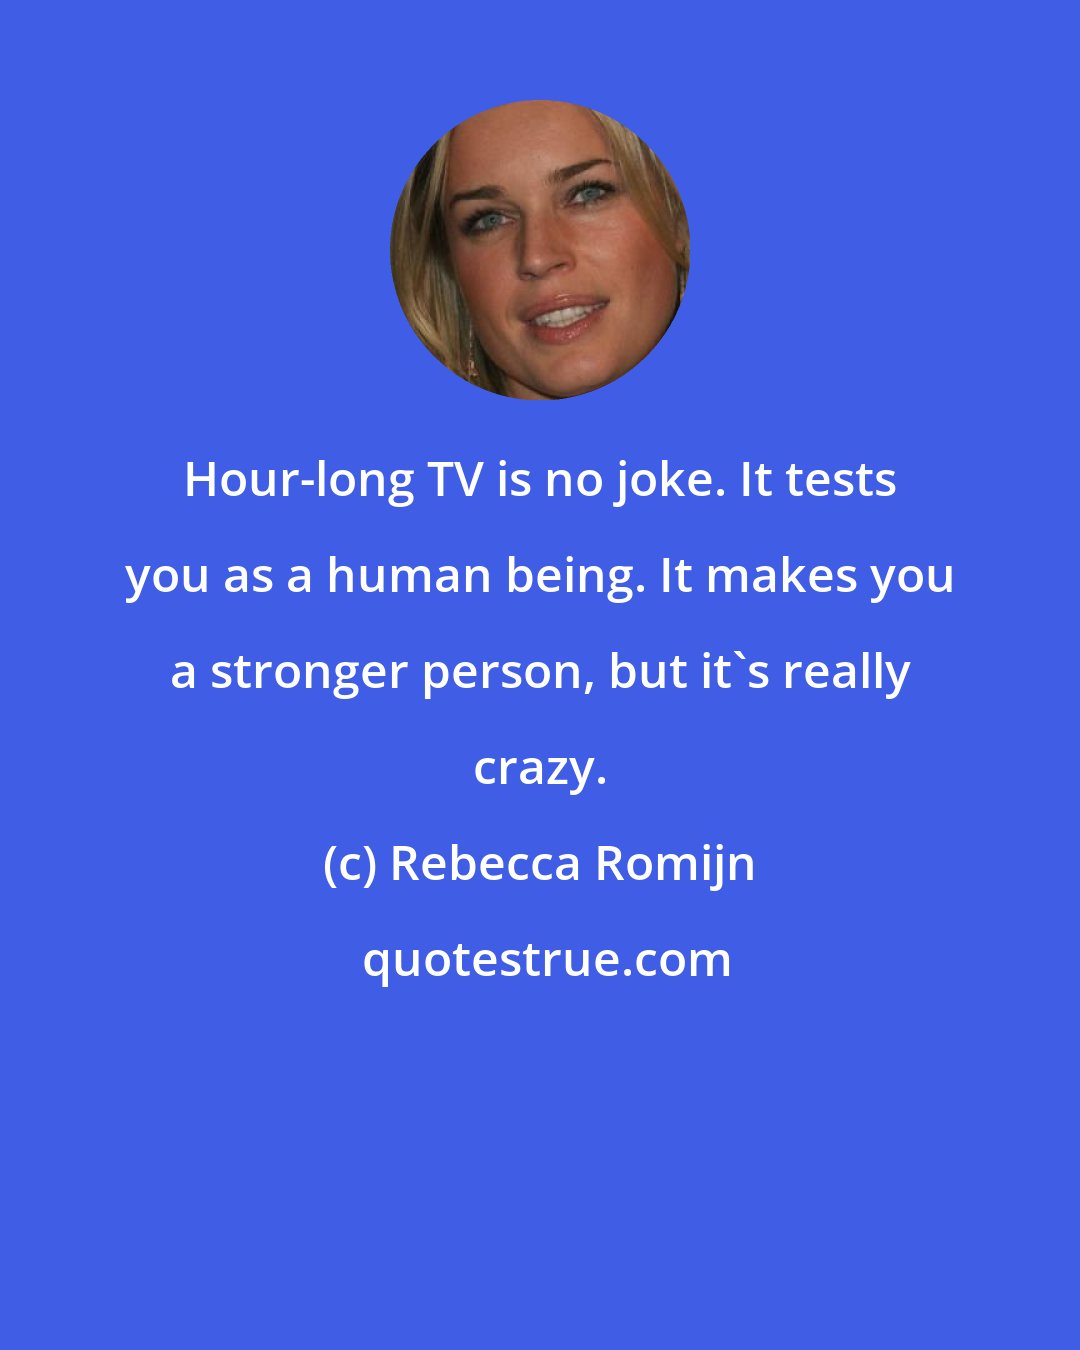 Rebecca Romijn: Hour-long TV is no joke. It tests you as a human being. It makes you a stronger person, but it's really crazy.